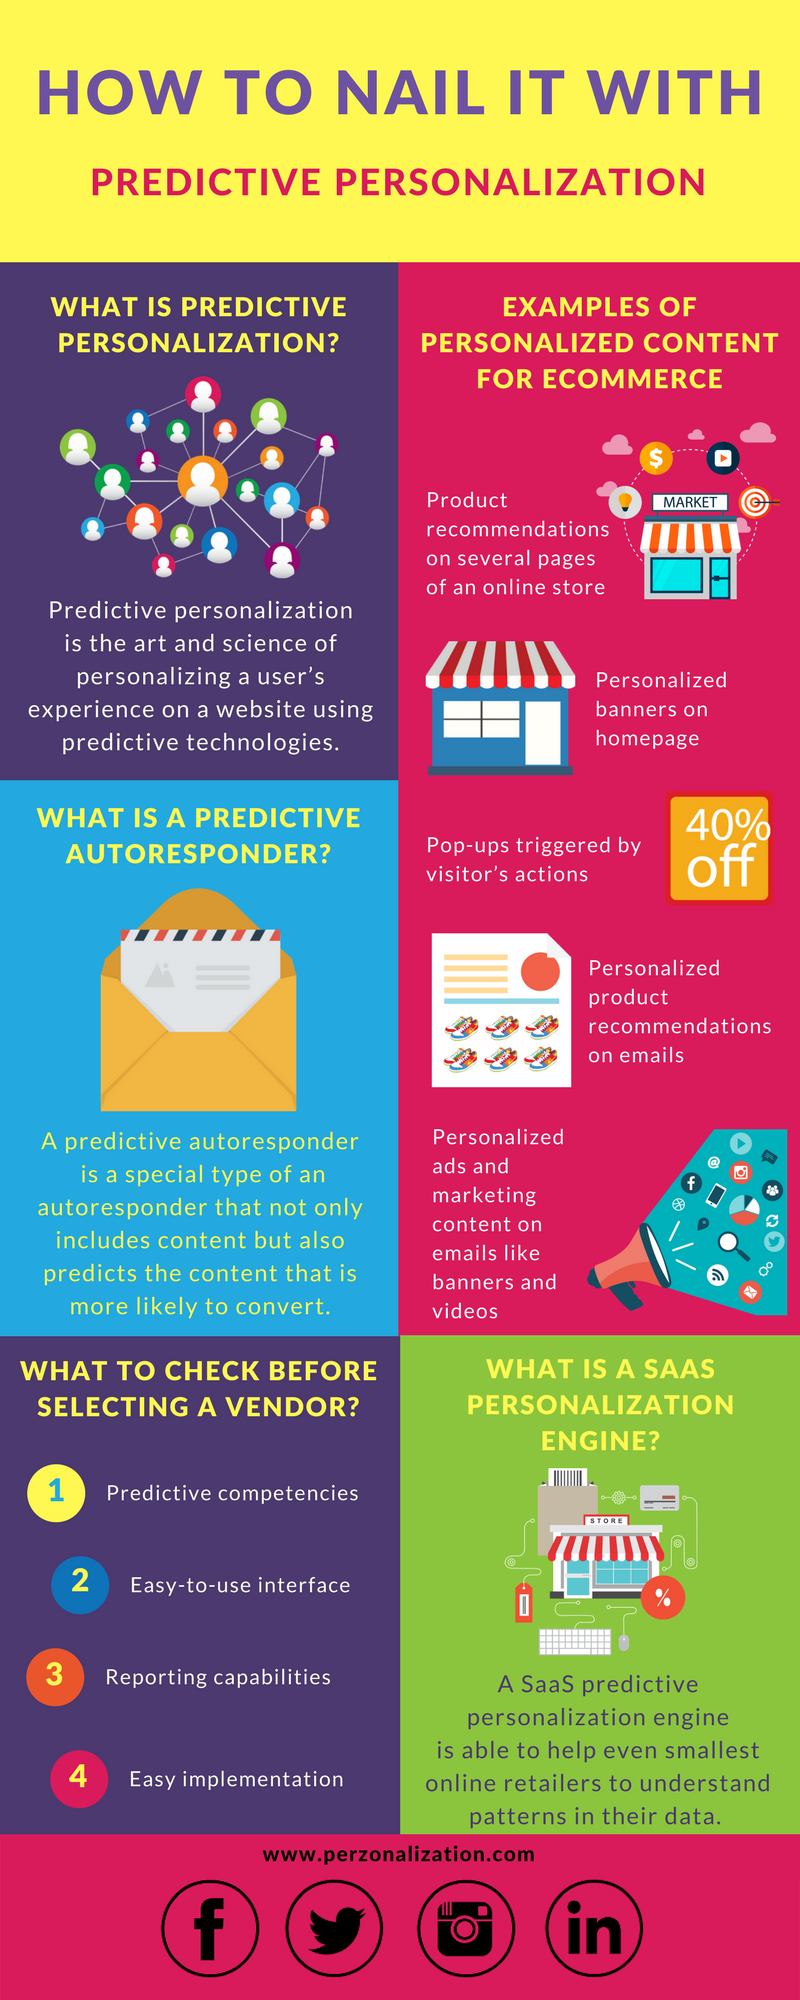 Predictive Personalization is the art and science of personalizing a user's experience on a website using predictive technologies. Find out more in this free infographic.